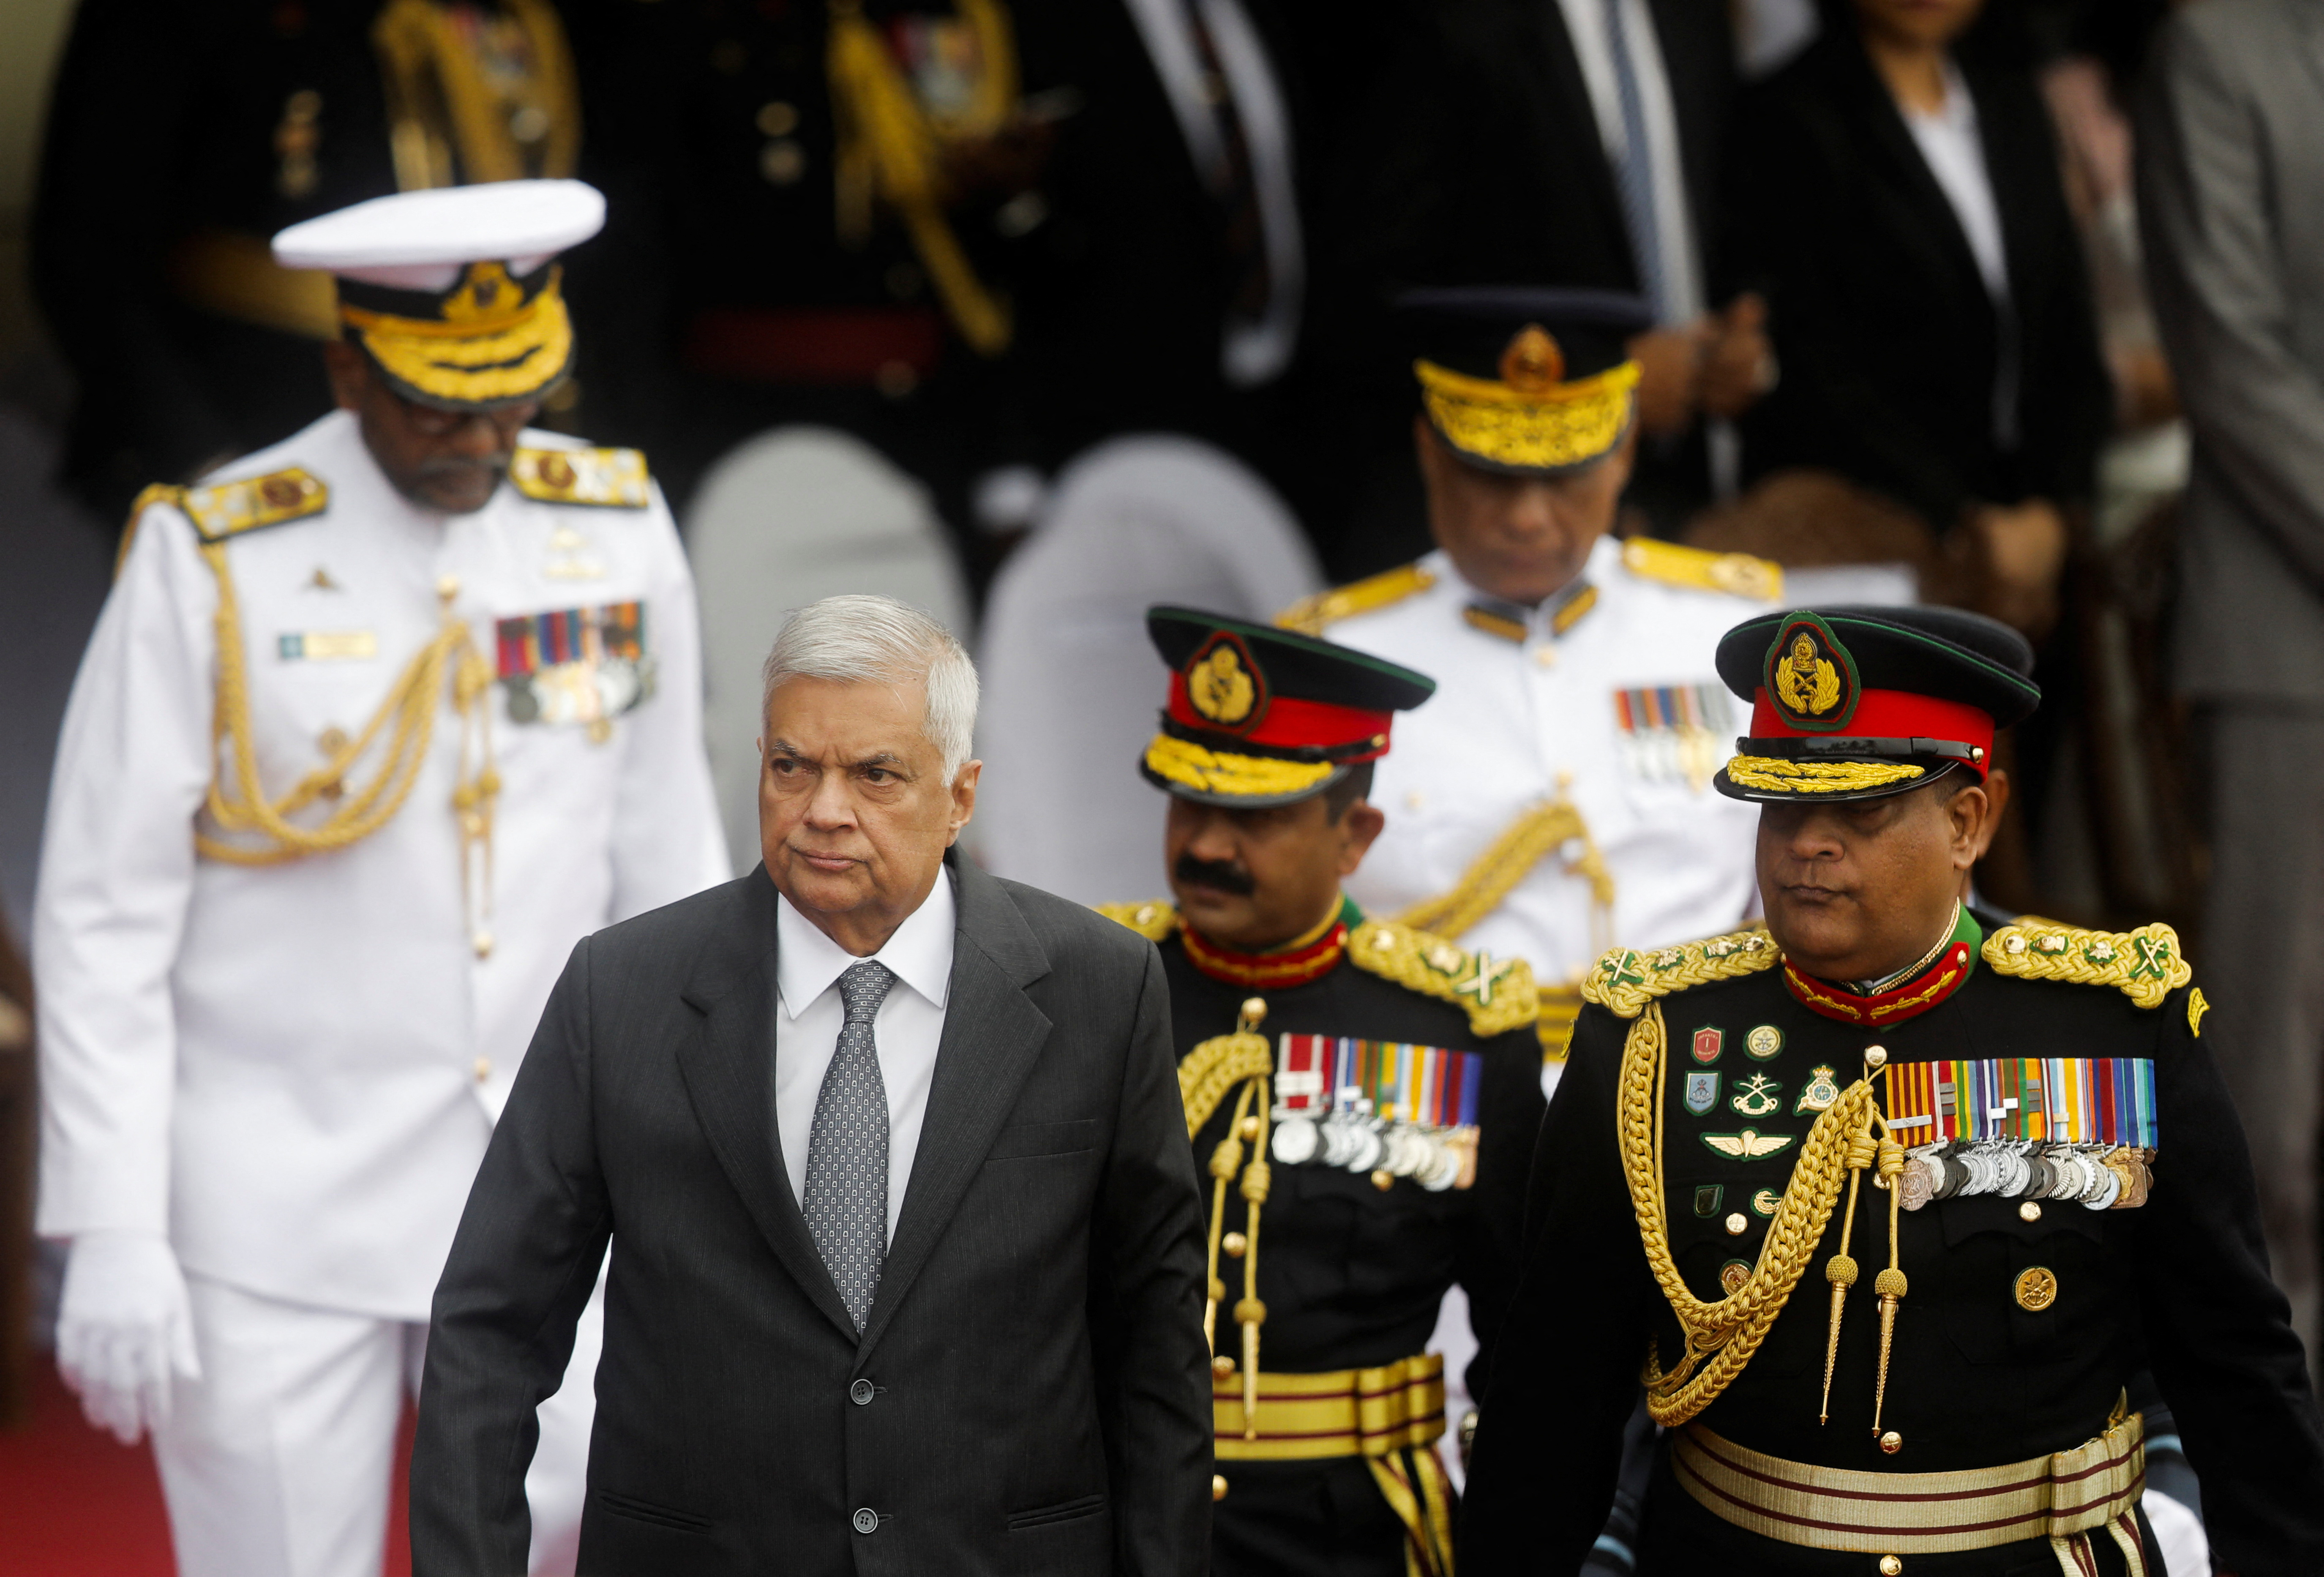 Sri Lanka's 75th Independence Day celebrations in Colombo